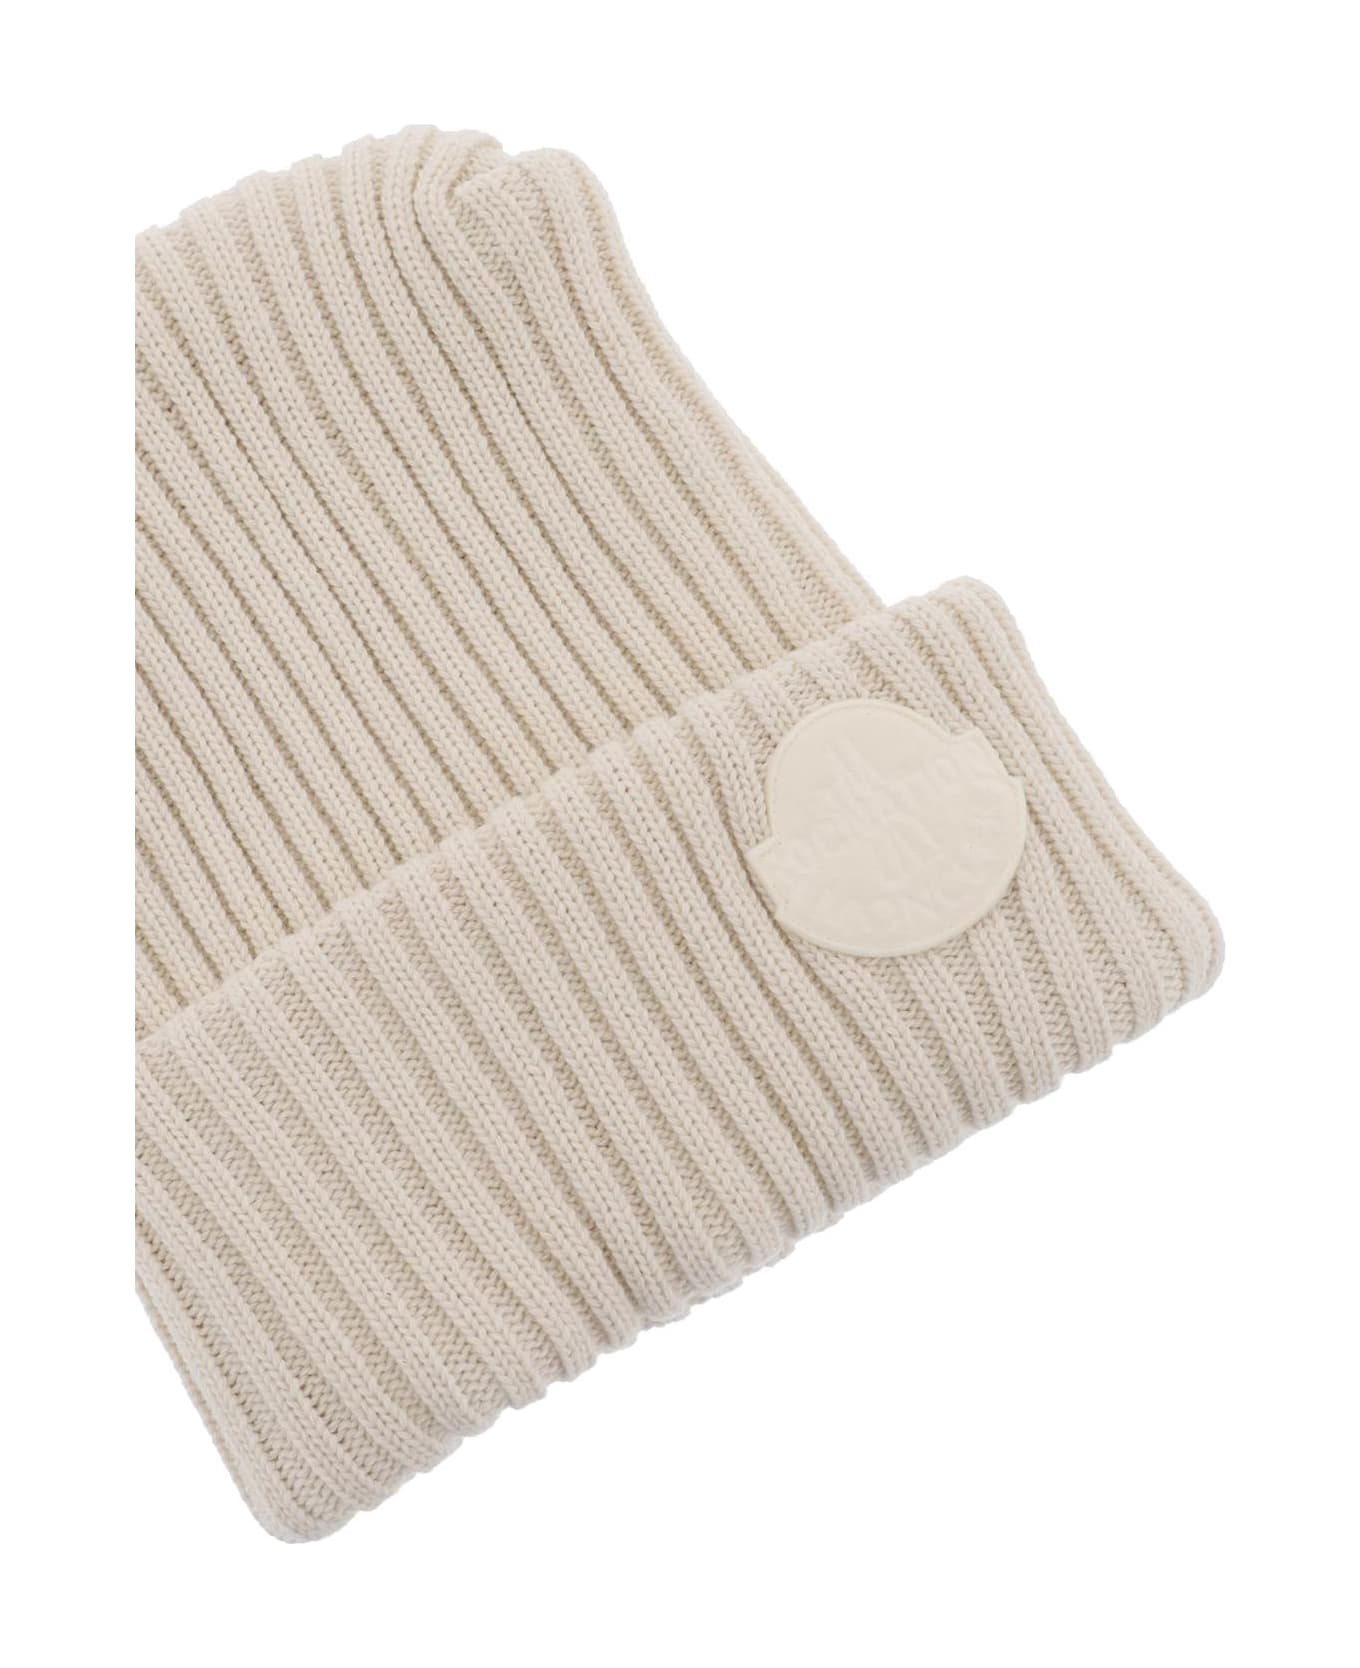 Moncler Tricot Beanie Hat - White コート